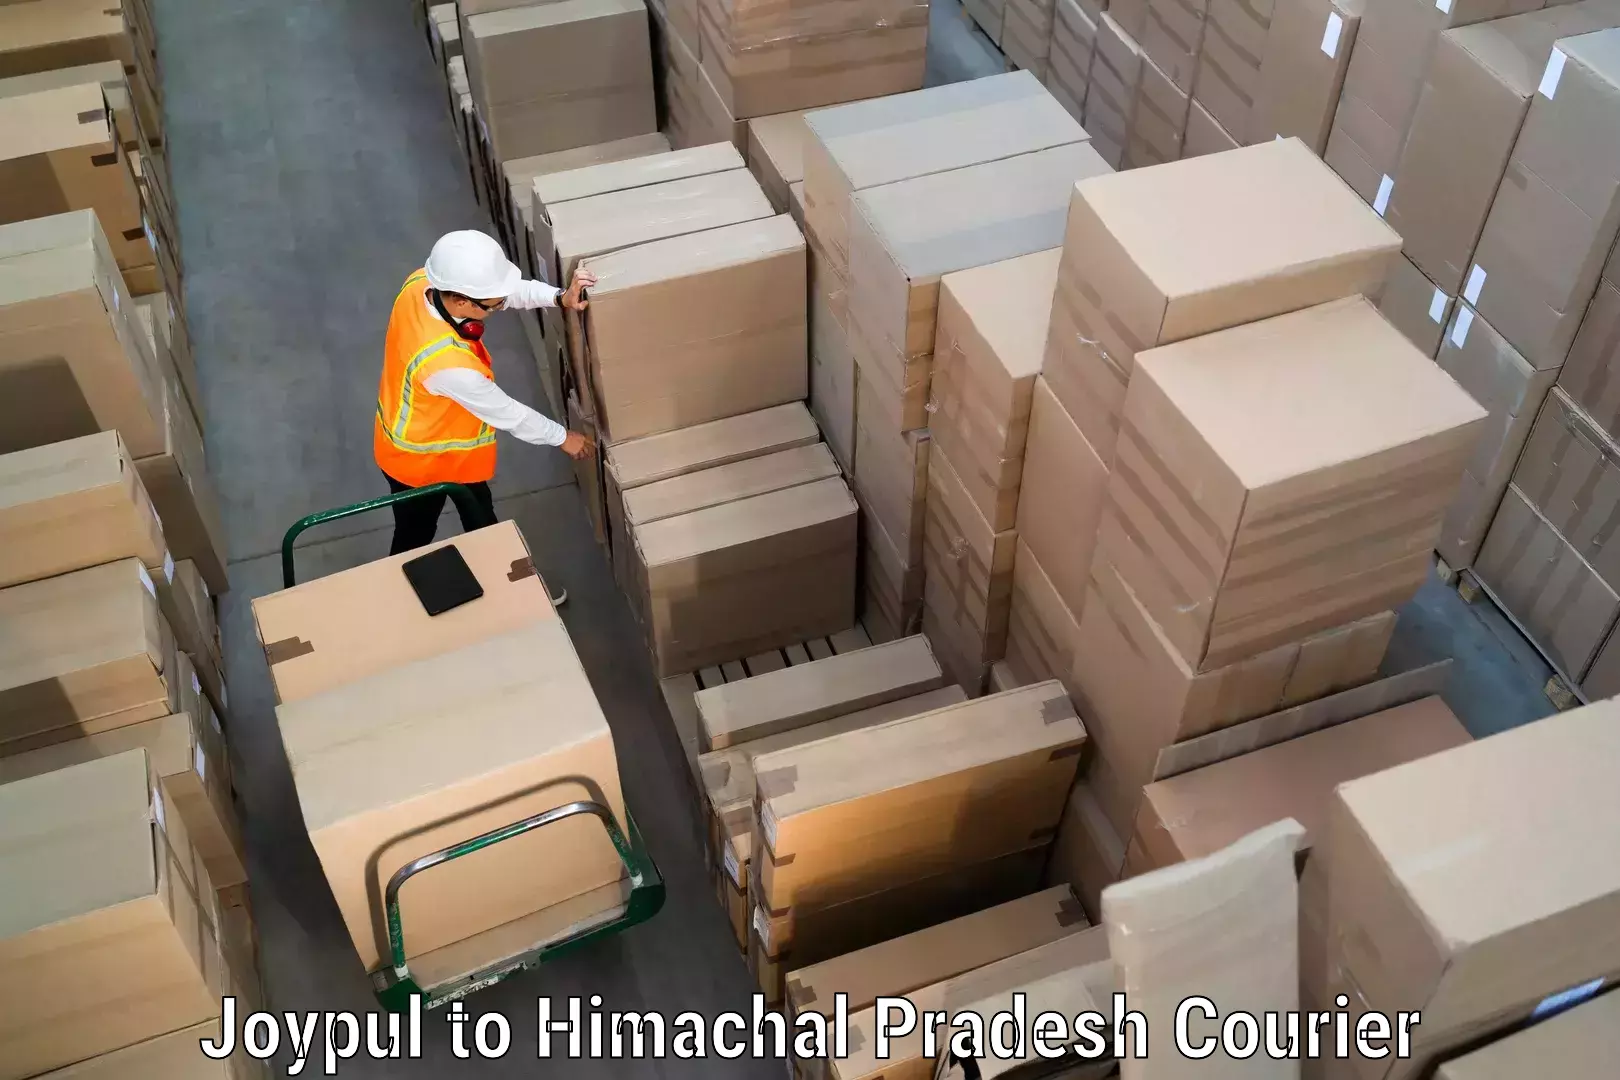 Efficient package consolidation Joypul to Himachal Pradesh